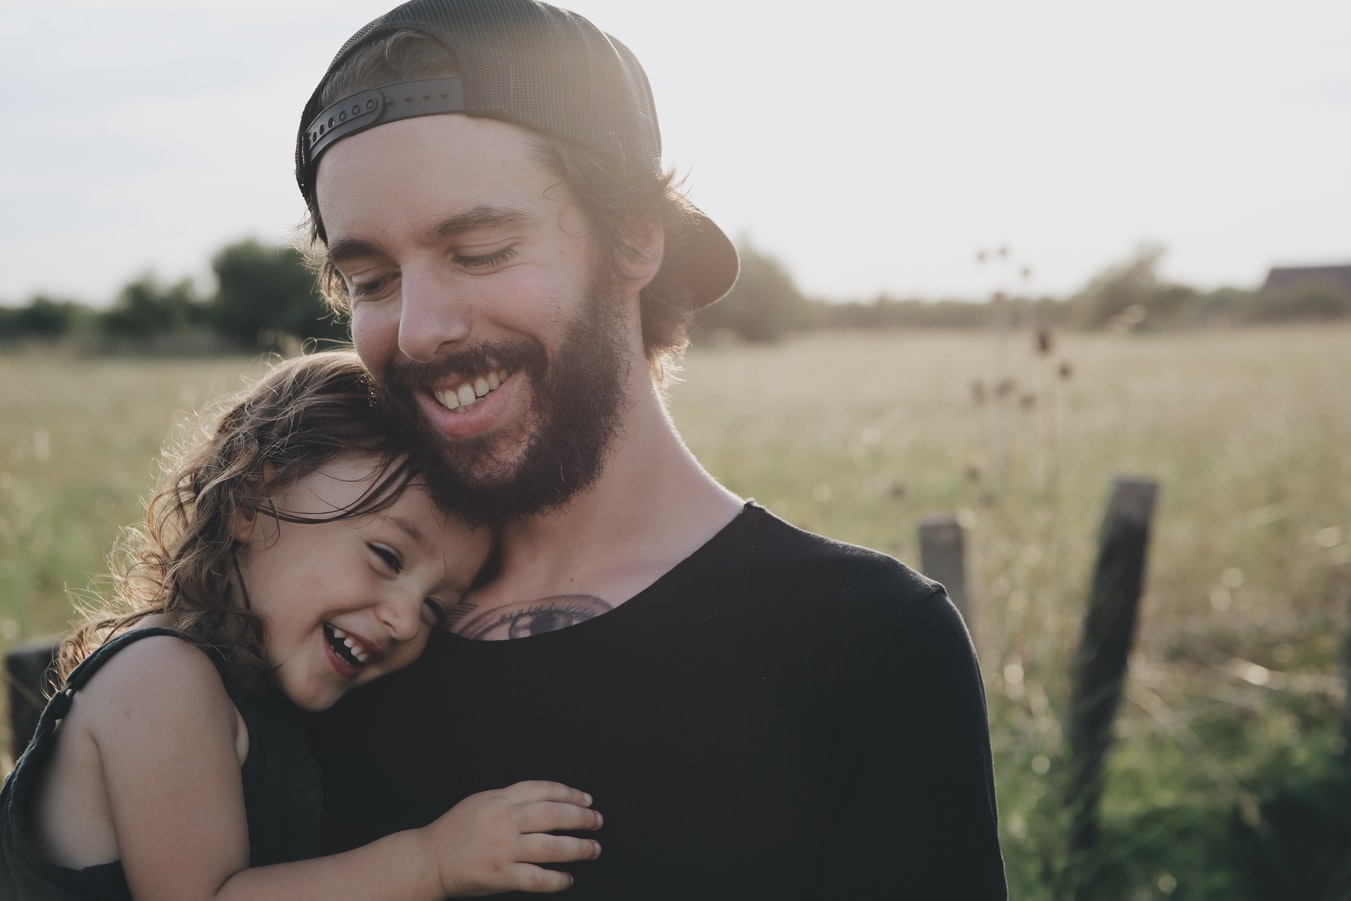 A young man smiling with his daughter in a grass field